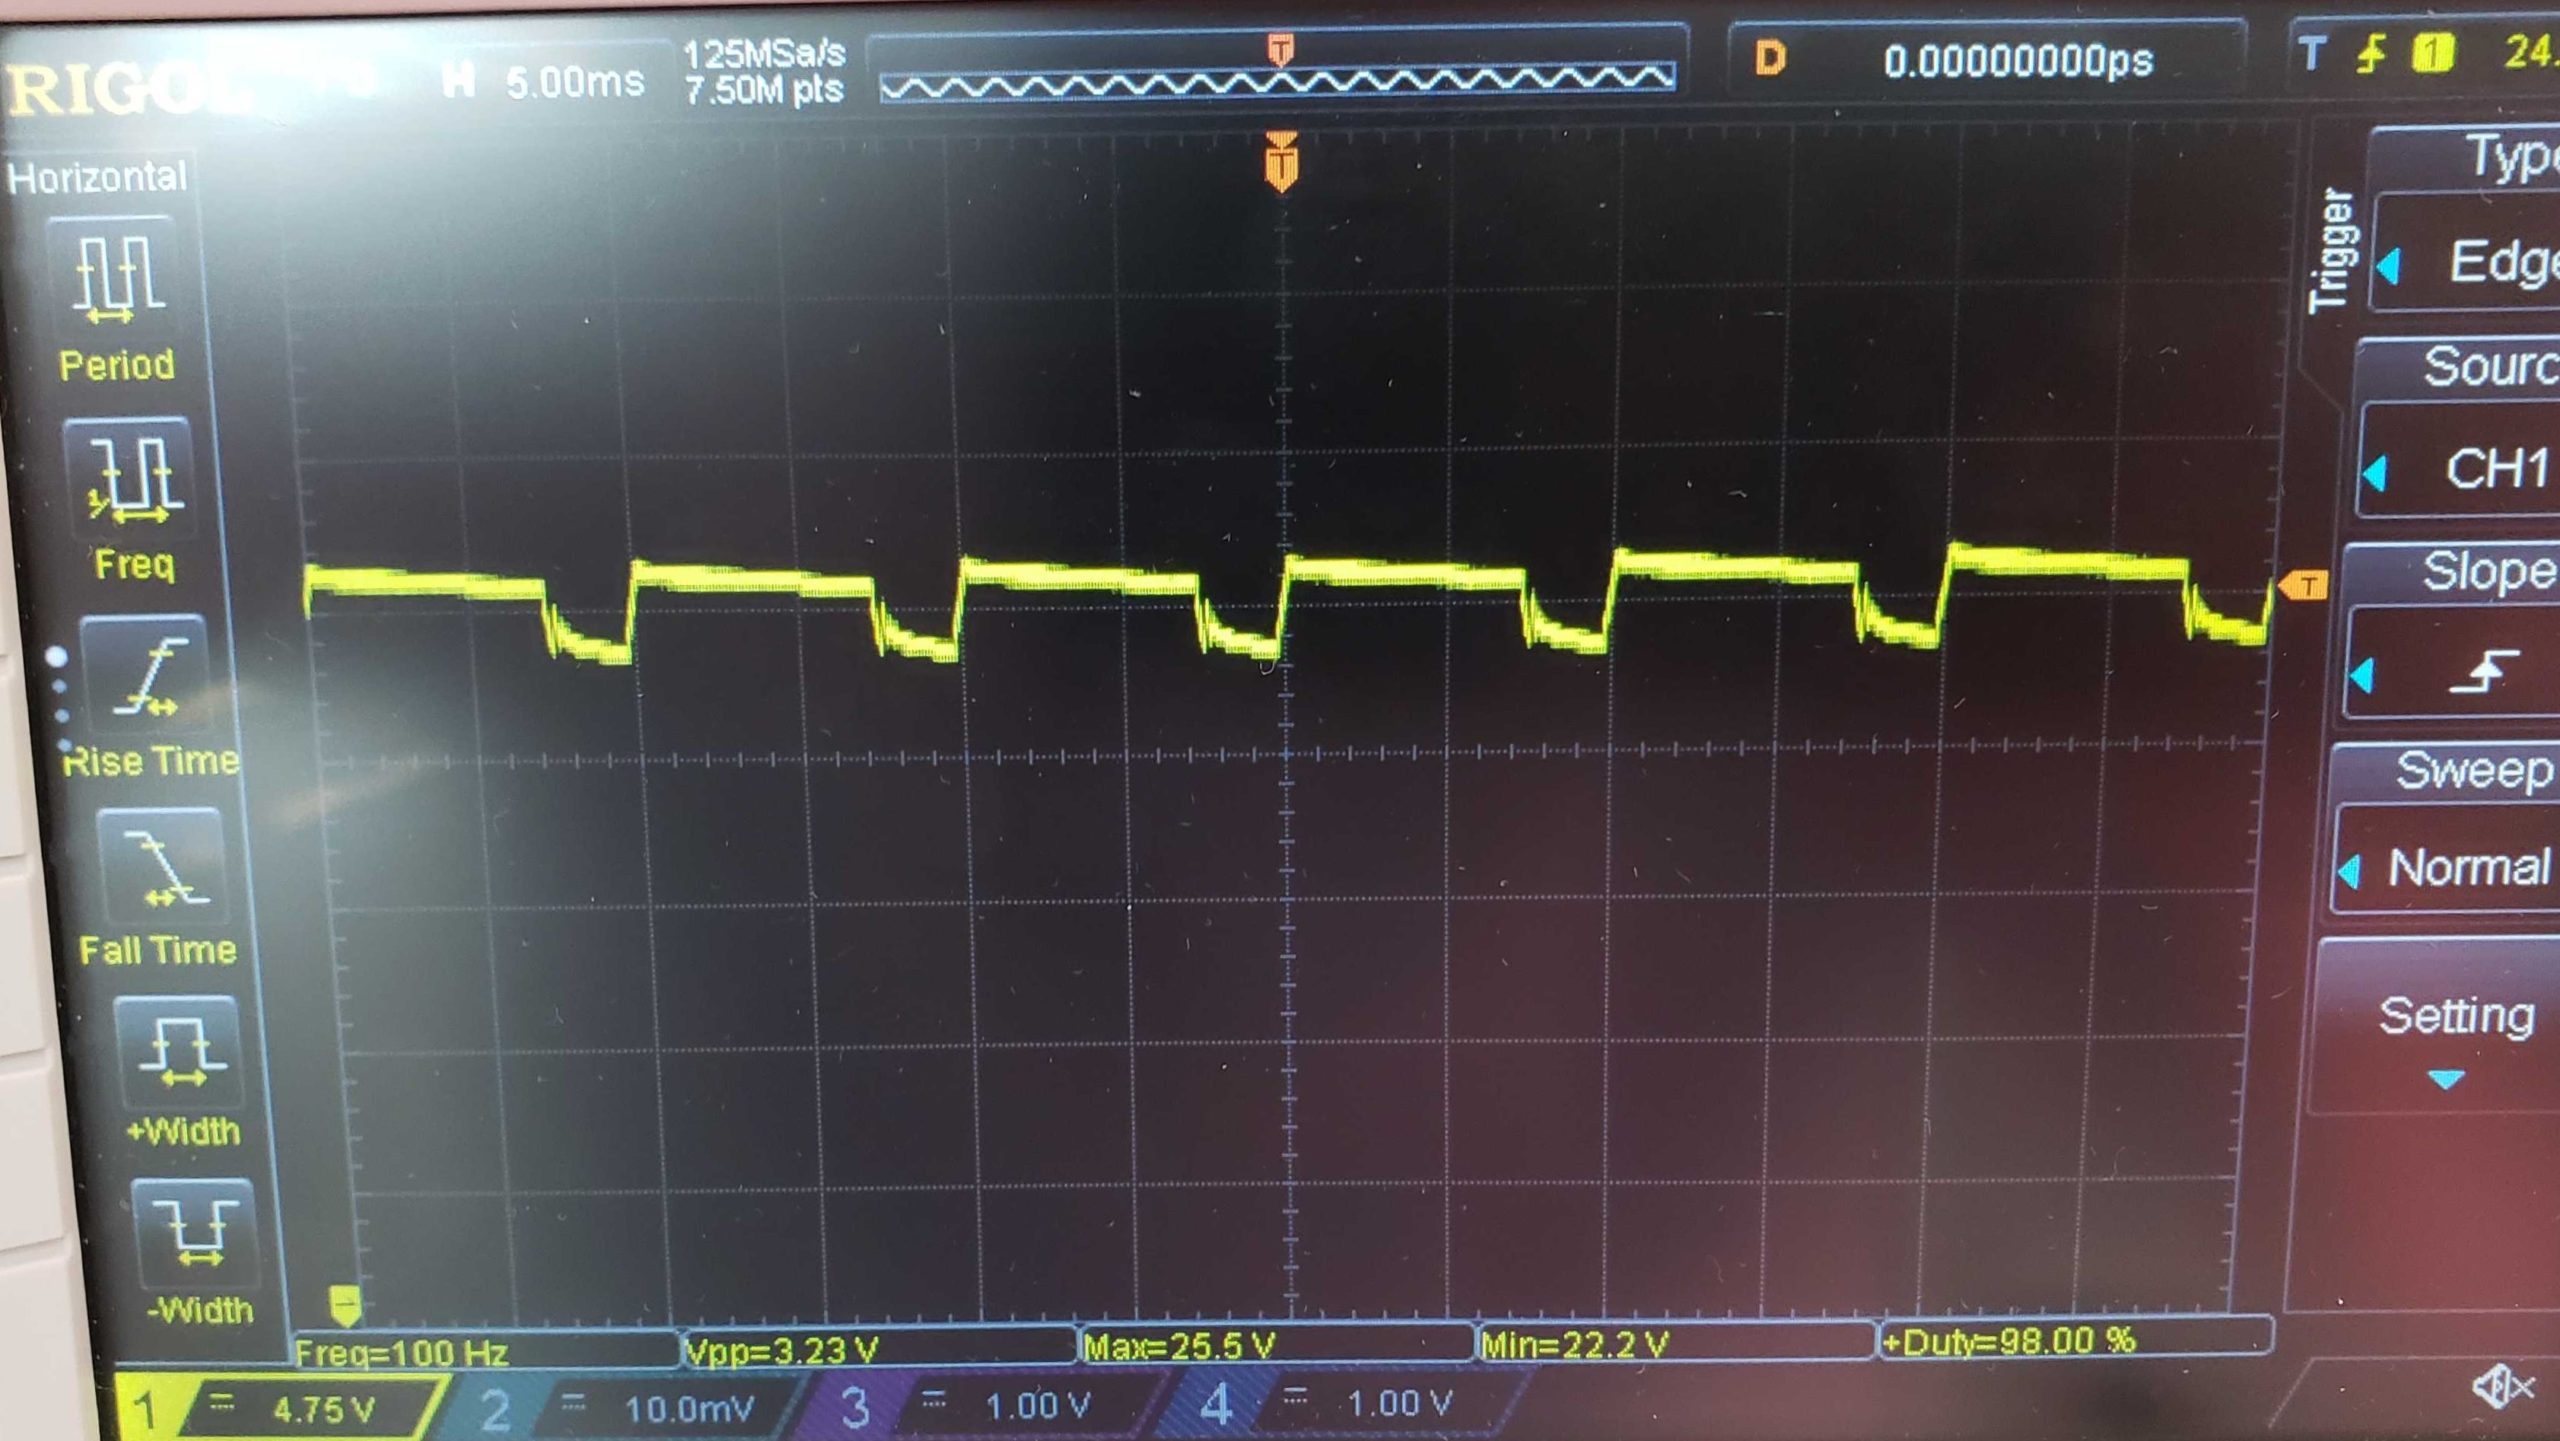 Troubleshooting this circuit on the oscilliscope shows a 3.23V voltage drop on the 24V rail.